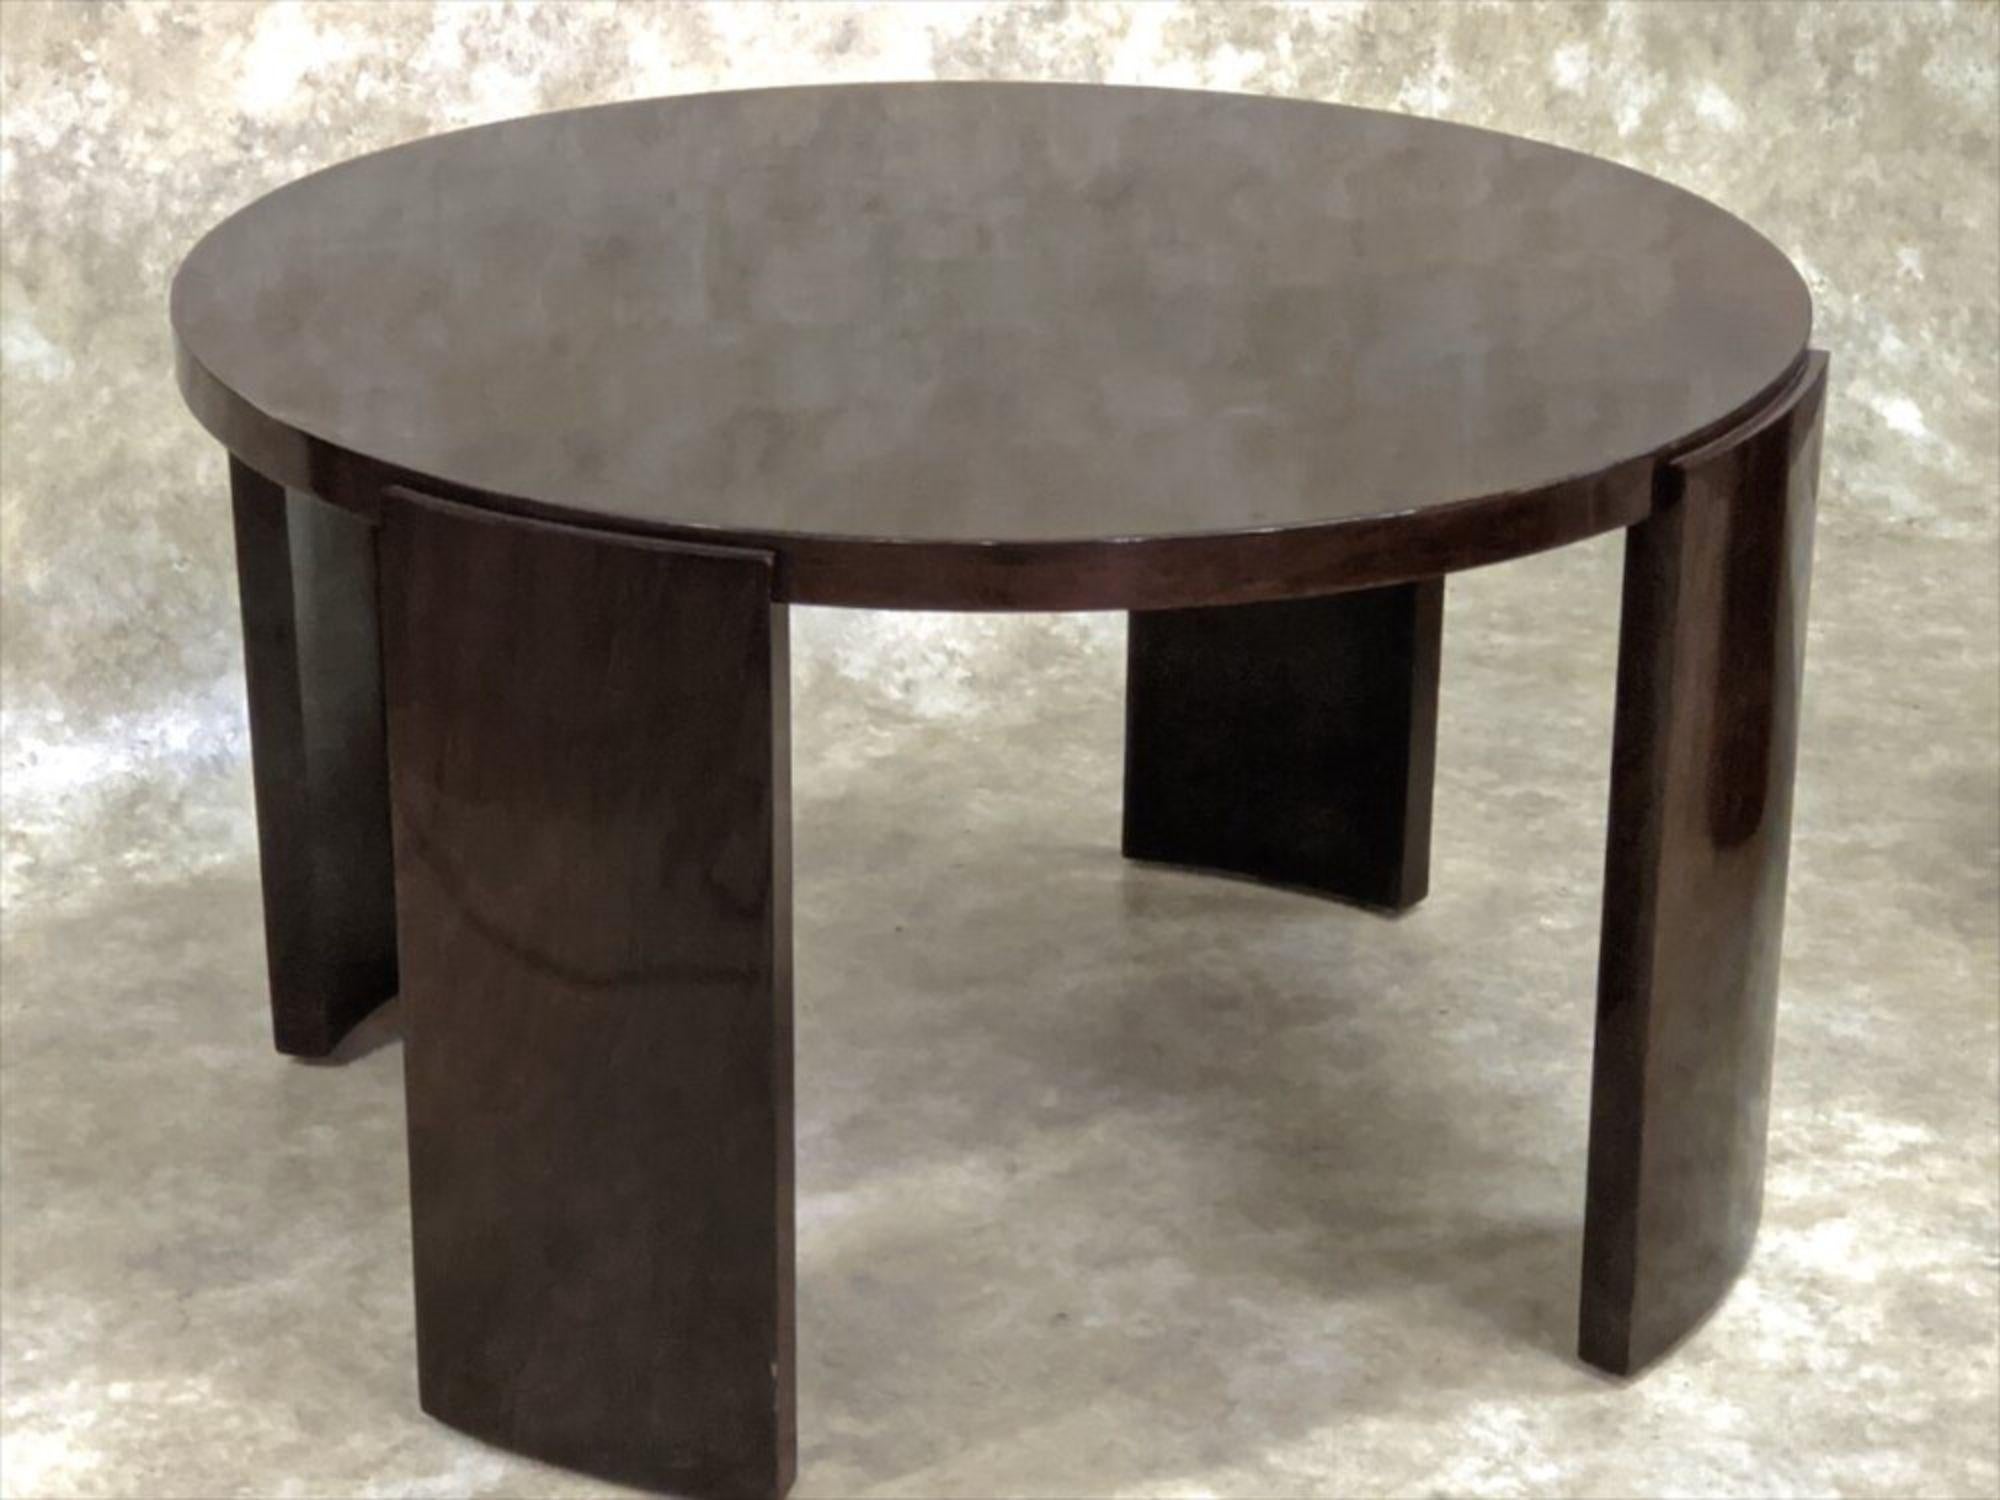 French Modernist Art Deco low round table, circa 1930 by Jacques Adnet in black rosewood. 

About 31” diameter x about 19” high.